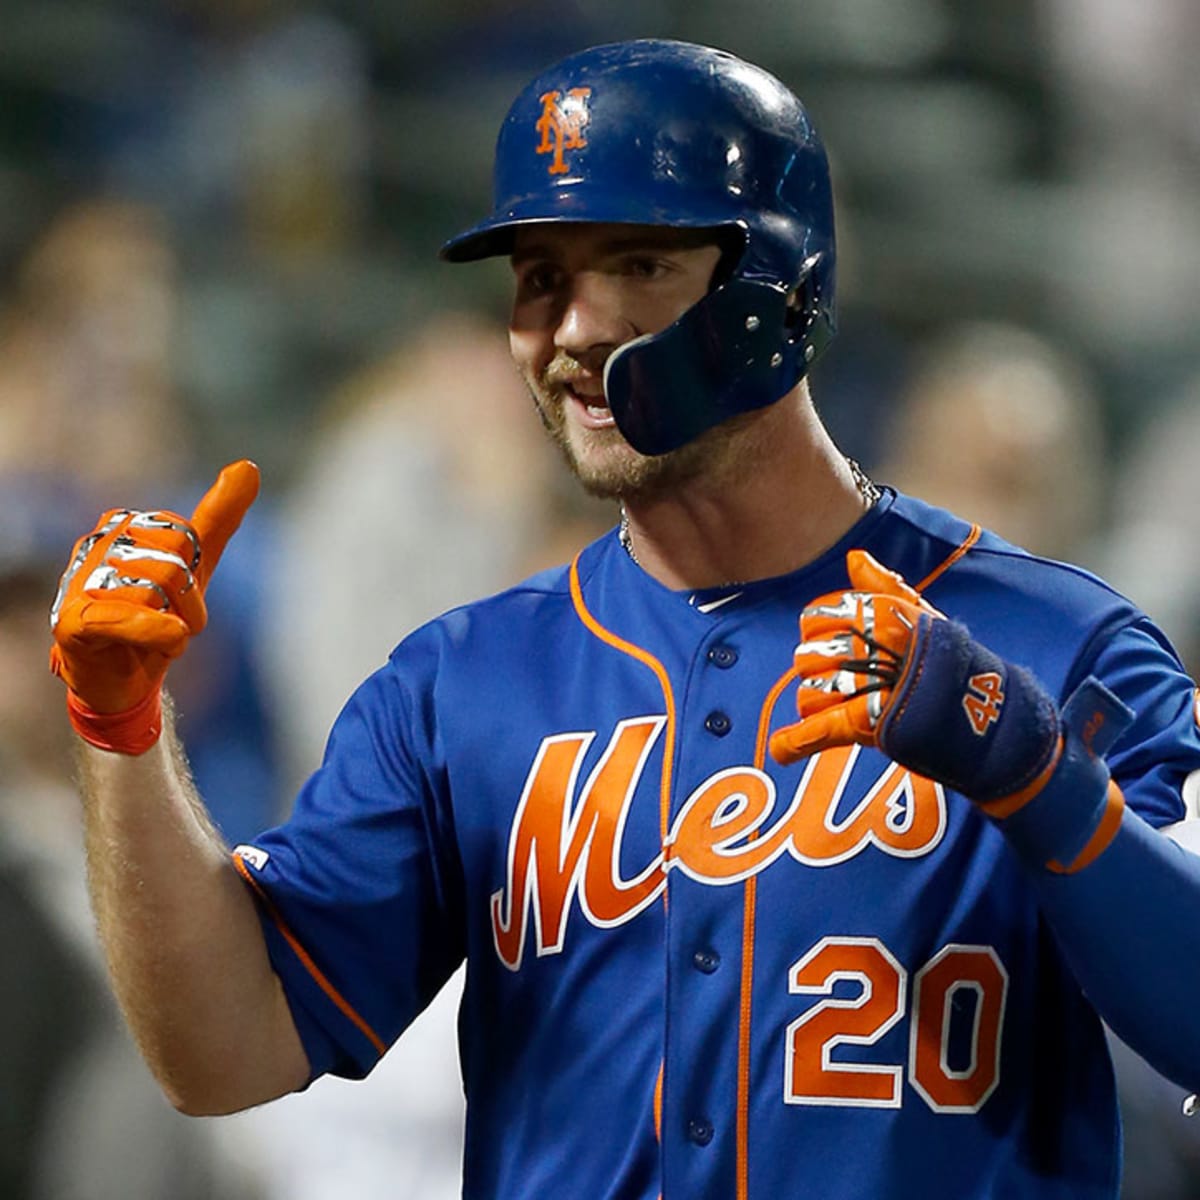 Pete Alonso walk-off HR gives NY Mets huge win over Rays